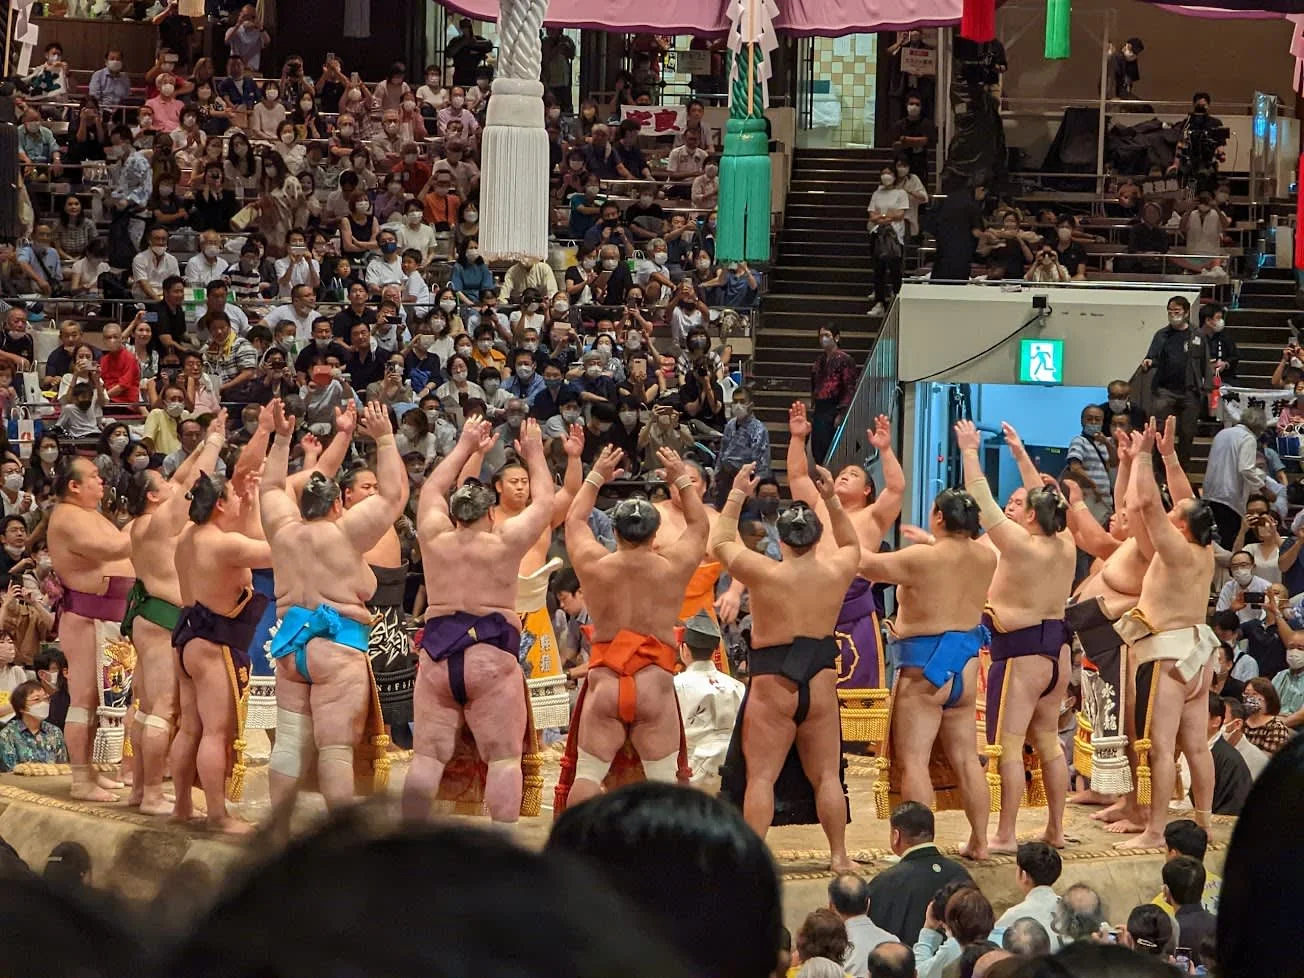 Nagoya Grand Sumo Tournament & Castle Walking Tour with Sumo Specialist Guide